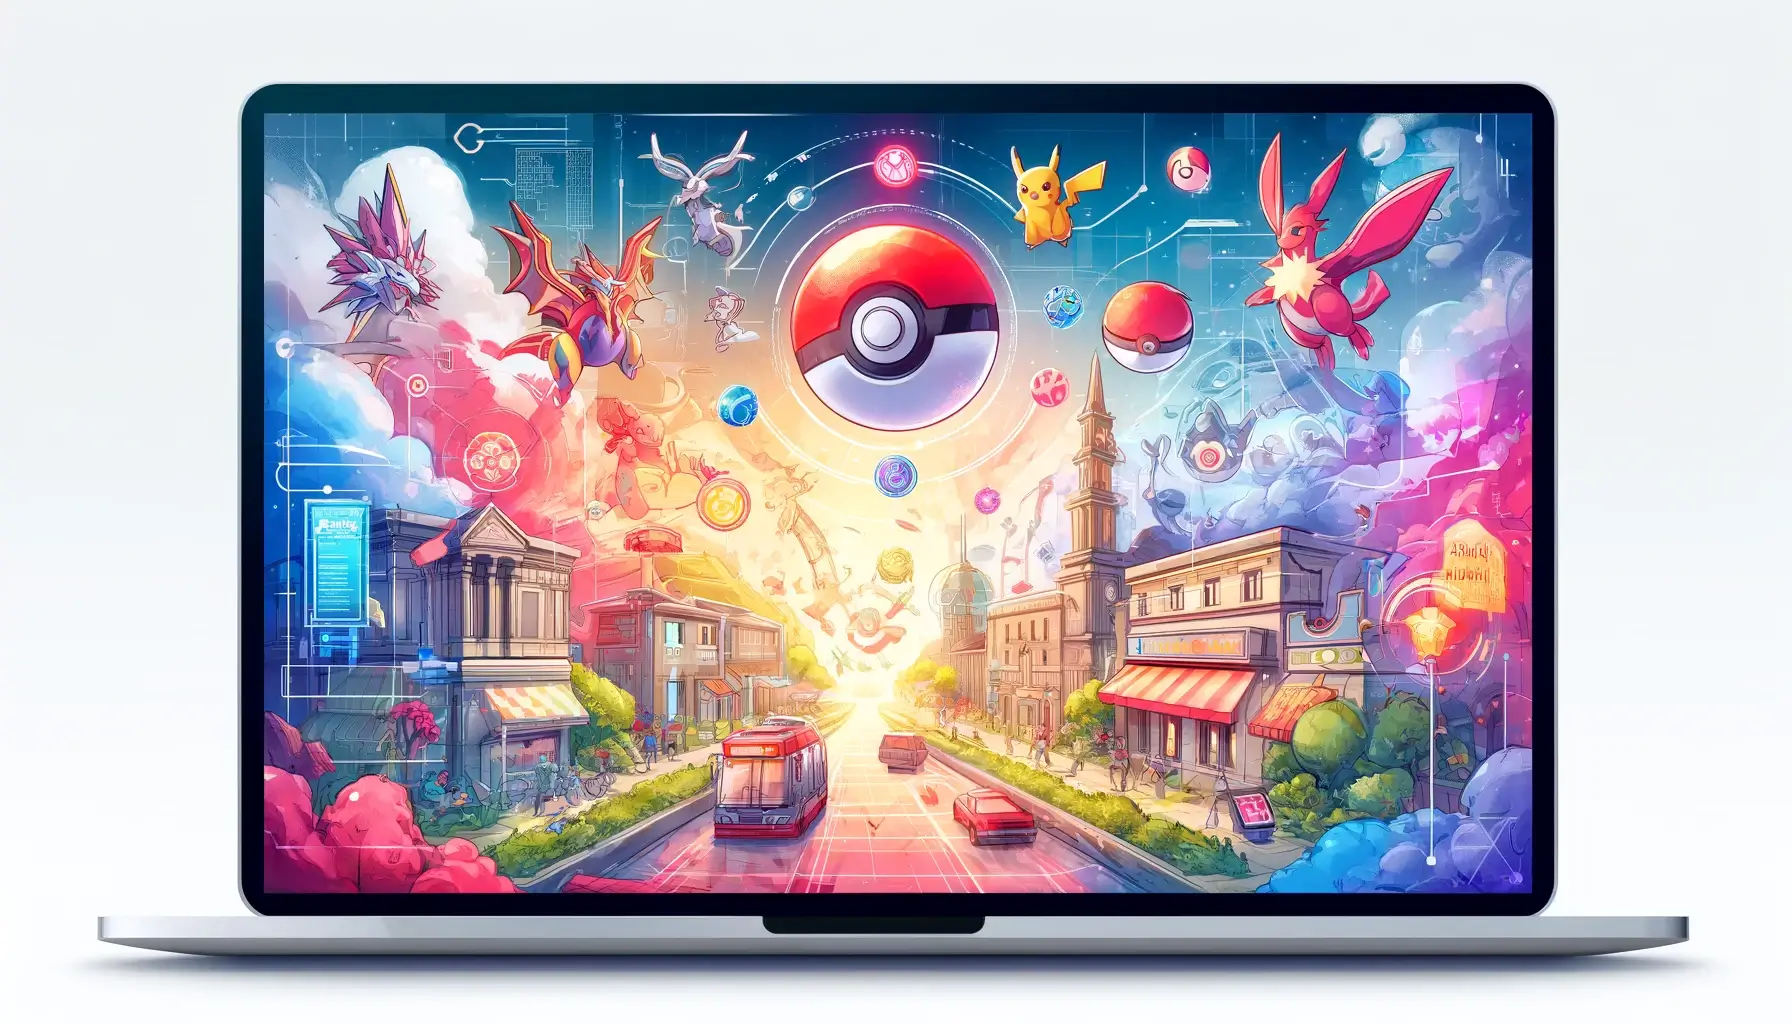 Create an artistic digital image for a blog header, illustrating the 'Pokémon Scarlet and Violet Interactive Map'. The artwork should feature elements